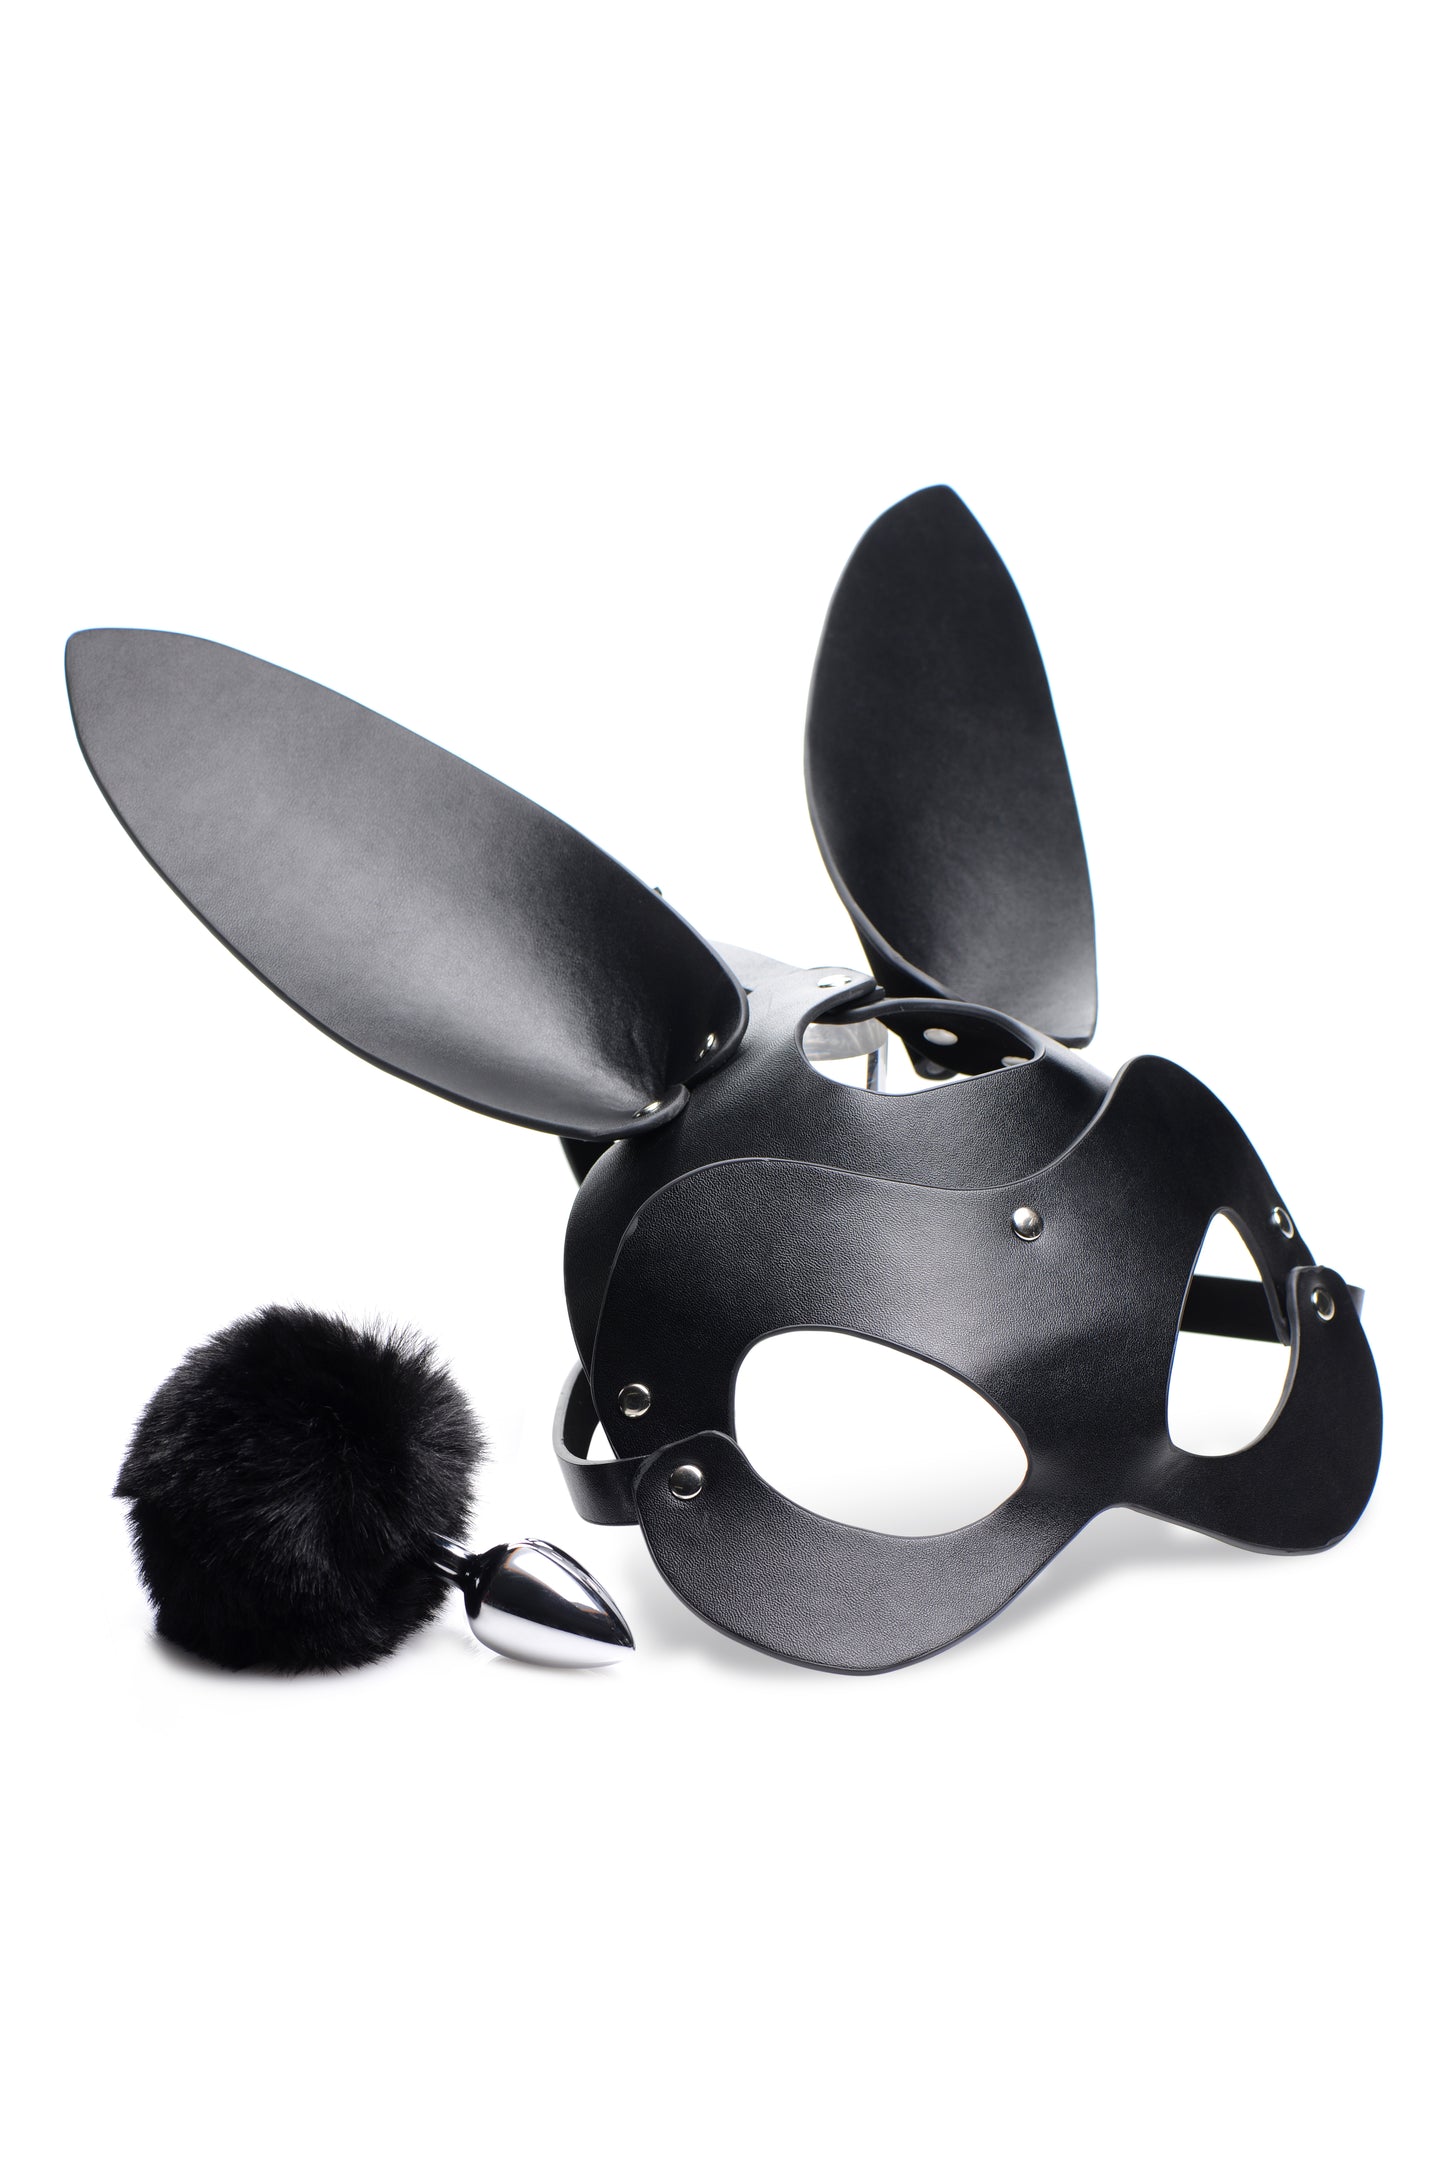 Bunny Tail Anal Plug and Mask Set - Just for you desires